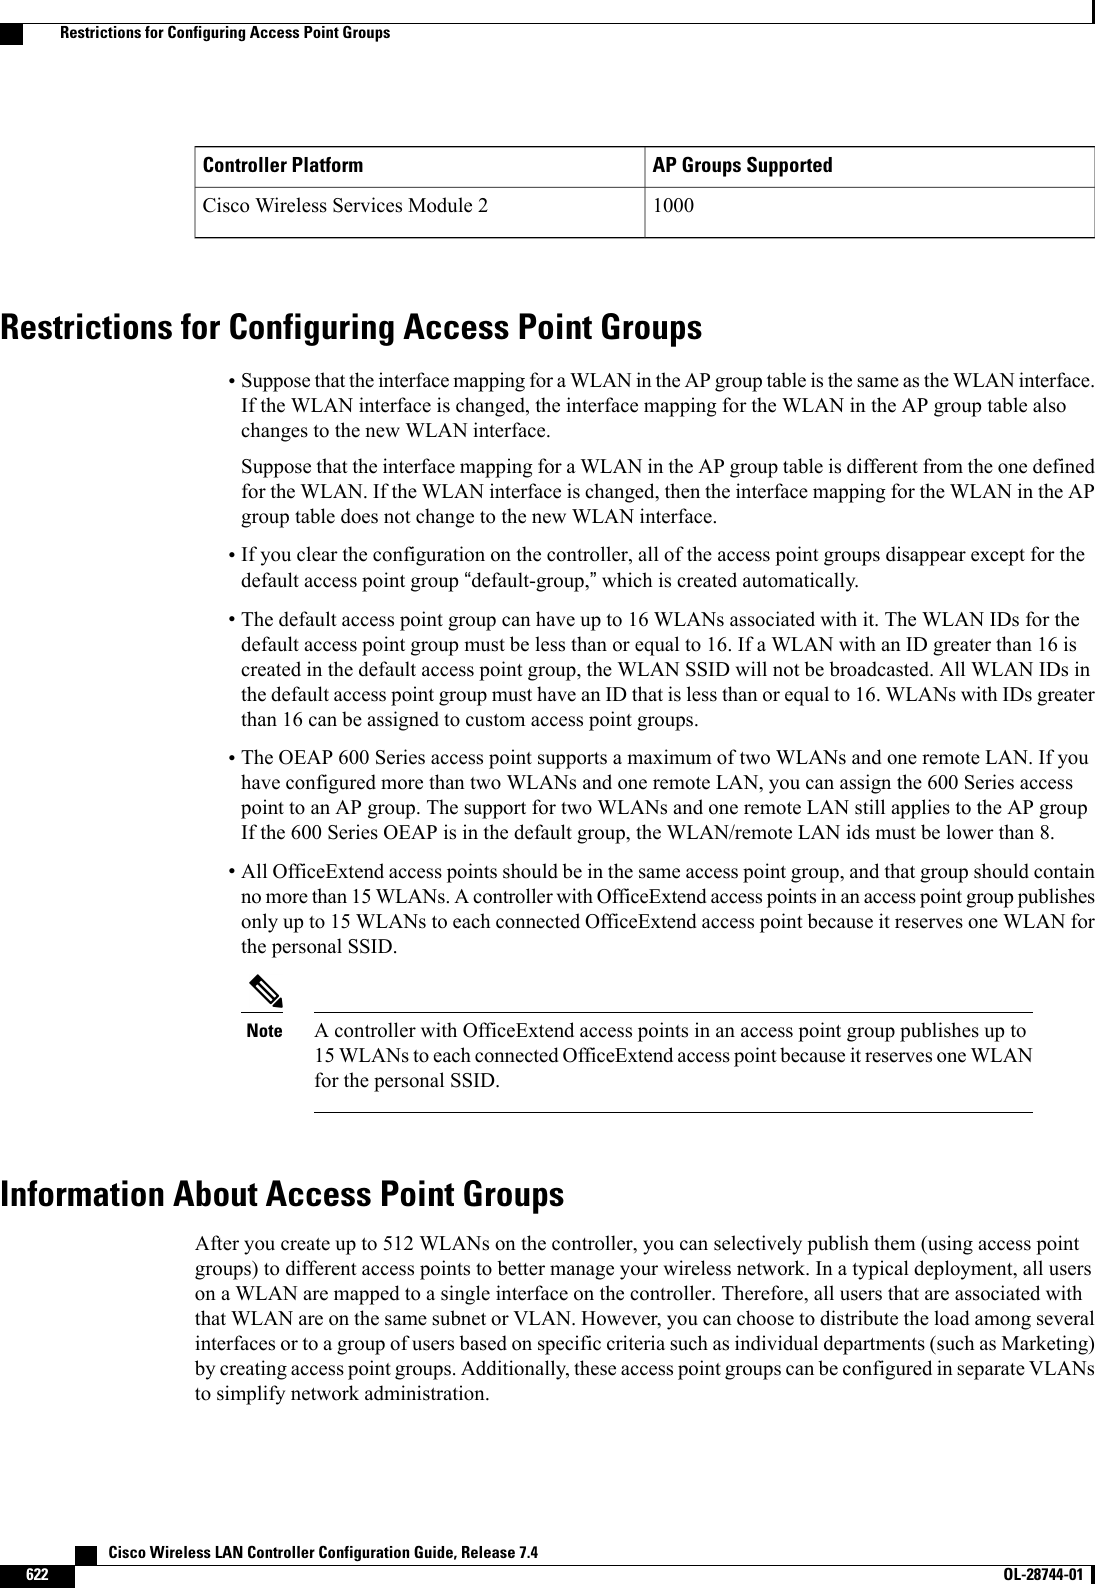 AP Groups SupportedController Platform1000Cisco Wireless Services Module 2Restrictions for Configuring Access Point Groups•Suppose that the interface mapping for a WLAN in the AP group table is the same as the WLAN interface.If the WLAN interface is changed, the interface mapping for the WLAN in the AP group table alsochanges to the new WLAN interface.Suppose that the interface mapping for a WLAN in the AP group table is different from the one definedfor the WLAN. If the WLAN interface is changed, then the interface mapping for the WLAN in the APgroup table does not change to the new WLAN interface.•If you clear the configuration on the controller, all of the access point groups disappear except for thedefault access point group “default-group,”which is created automatically.•The default access point group can have up to 16 WLANs associated with it. The WLAN IDs for thedefault access point group must be less than or equal to 16. If a WLAN with an ID greater than 16 iscreated in the default access point group, the WLAN SSID will not be broadcasted. All WLAN IDs inthe default access point group must have an ID that is less than or equal to 16. WLANs with IDs greaterthan 16 can be assigned to custom access point groups.•The OEAP 600 Series access point supports a maximum of two WLANs and one remote LAN. If youhave configured more than two WLANs and one remote LAN, you can assign the 600 Series accesspoint to an AP group. The support for two WLANs and one remote LAN still applies to the AP groupIf the 600 Series OEAP is in the default group, the WLAN/remote LAN ids must be lower than 8.•All OfficeExtend access points should be in the same access point group, and that group should containno more than 15 WLANs. A controller with OfficeExtend access points in an access point group publishesonly up to 15 WLANs to each connected OfficeExtend access point because it reserves one WLAN forthe personal SSID.A controller with OfficeExtend access points in an access point group publishes up to15 WLANs to each connected OfficeExtend access point because it reserves one WLANfor the personal SSID.NoteInformation About Access Point GroupsAfter you create up to 512 WLANs on the controller, you can selectively publish them (using access pointgroups) to different access points to better manage your wireless network. In a typical deployment, all userson a WLAN are mapped to a single interface on the controller. Therefore, all users that are associated withthat WLAN are on the same subnet or VLAN. However, you can choose to distribute the load among severalinterfaces or to a group of users based on specific criteria such as individual departments (such as Marketing)by creating access point groups. Additionally, these access point groups can be configured in separate VLANsto simplify network administration.   Cisco Wireless LAN Controller Configuration Guide, Release 7.4622 OL-28744-01  Restrictions for Configuring Access Point Groups